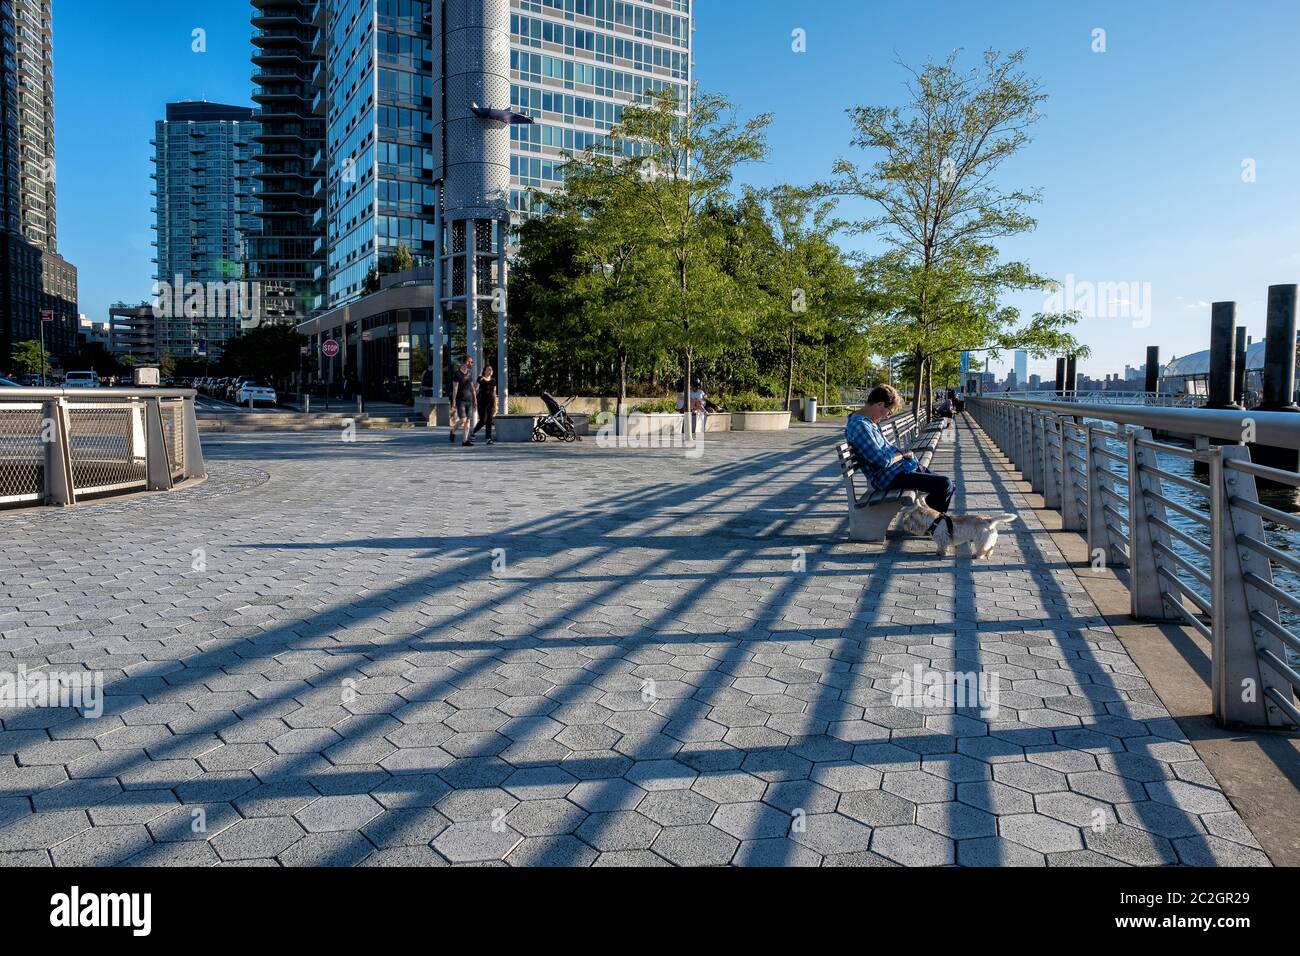 The buildings of  Long Island City view from Gantry Plaza State Park Recreational Dock Stock Photo